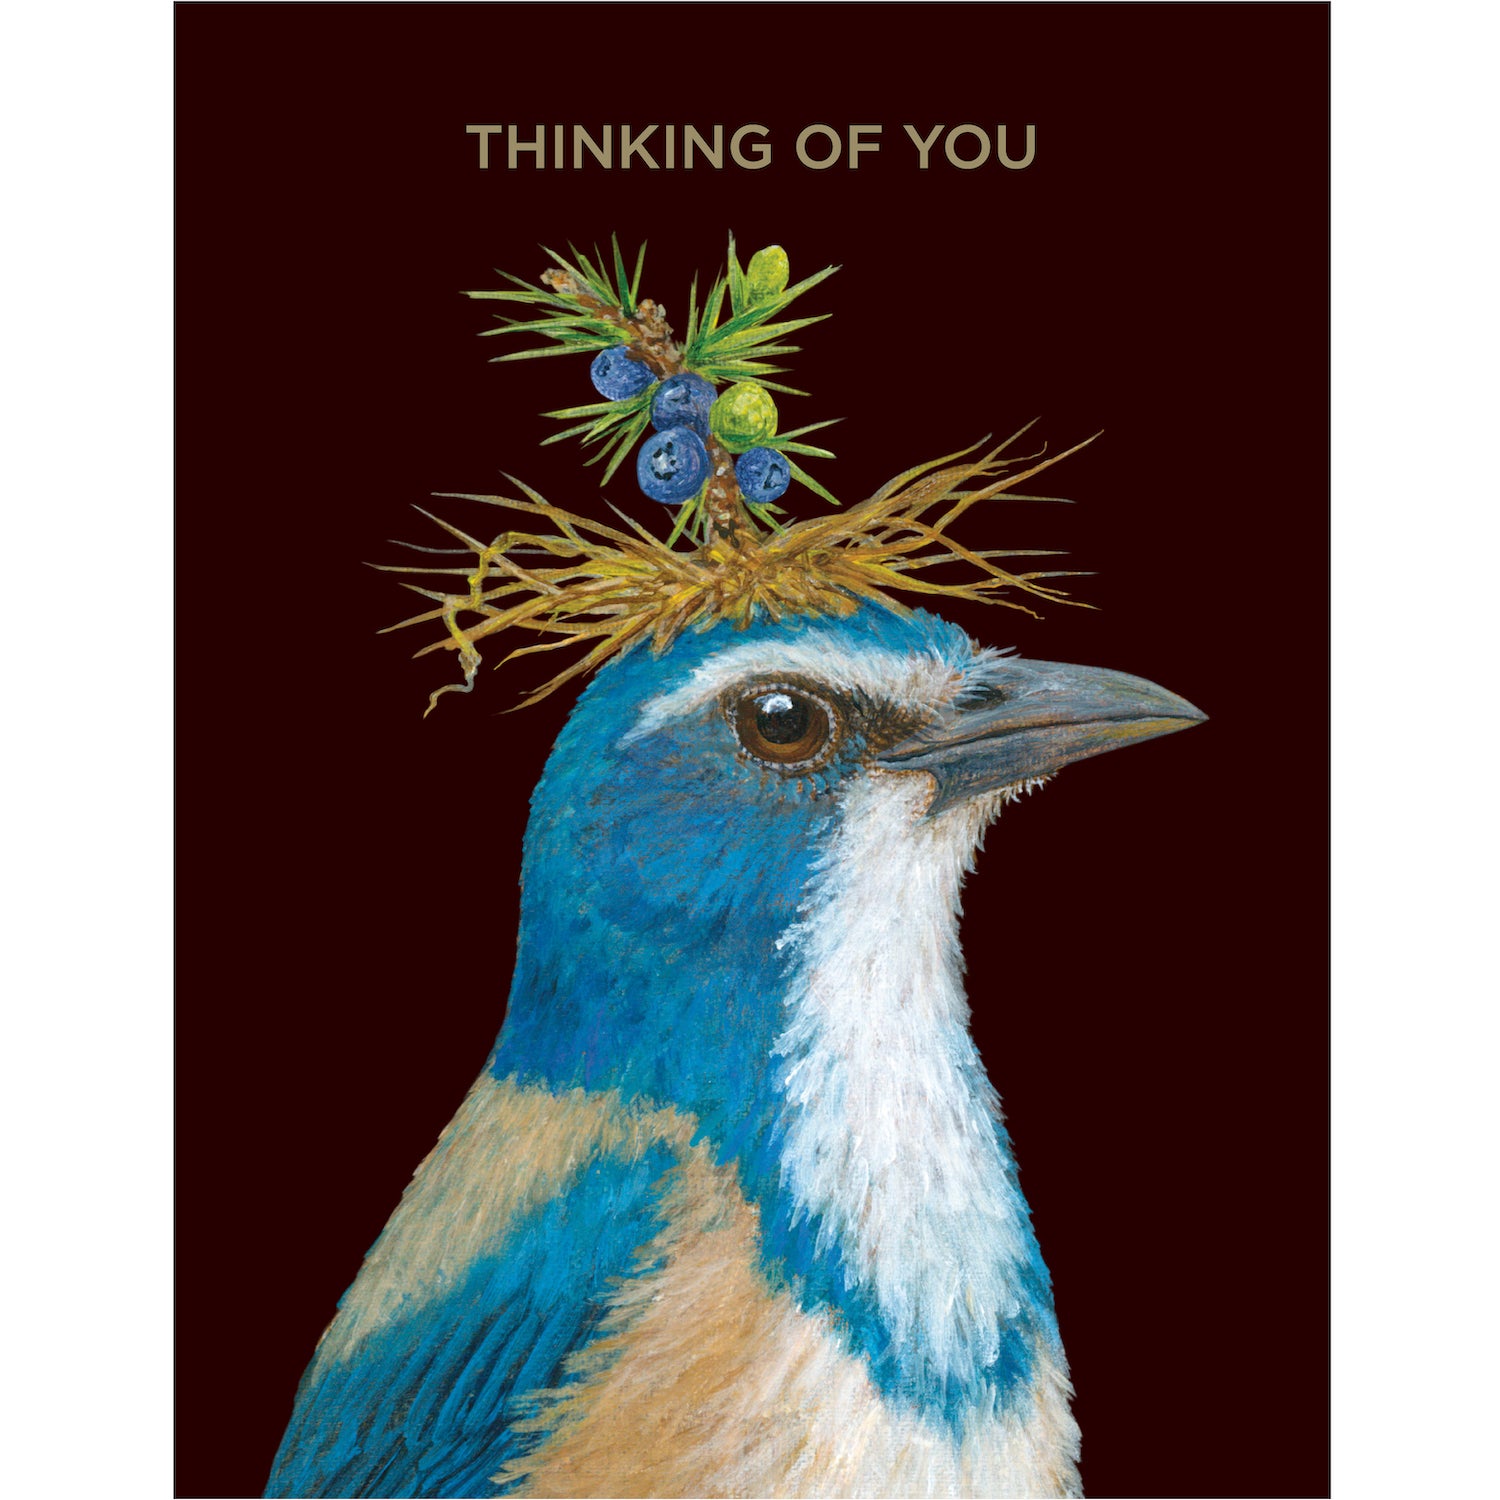 A blue bird with a vibrant blue crown on its head, captured beautifully in artist Vicki Sawyer&